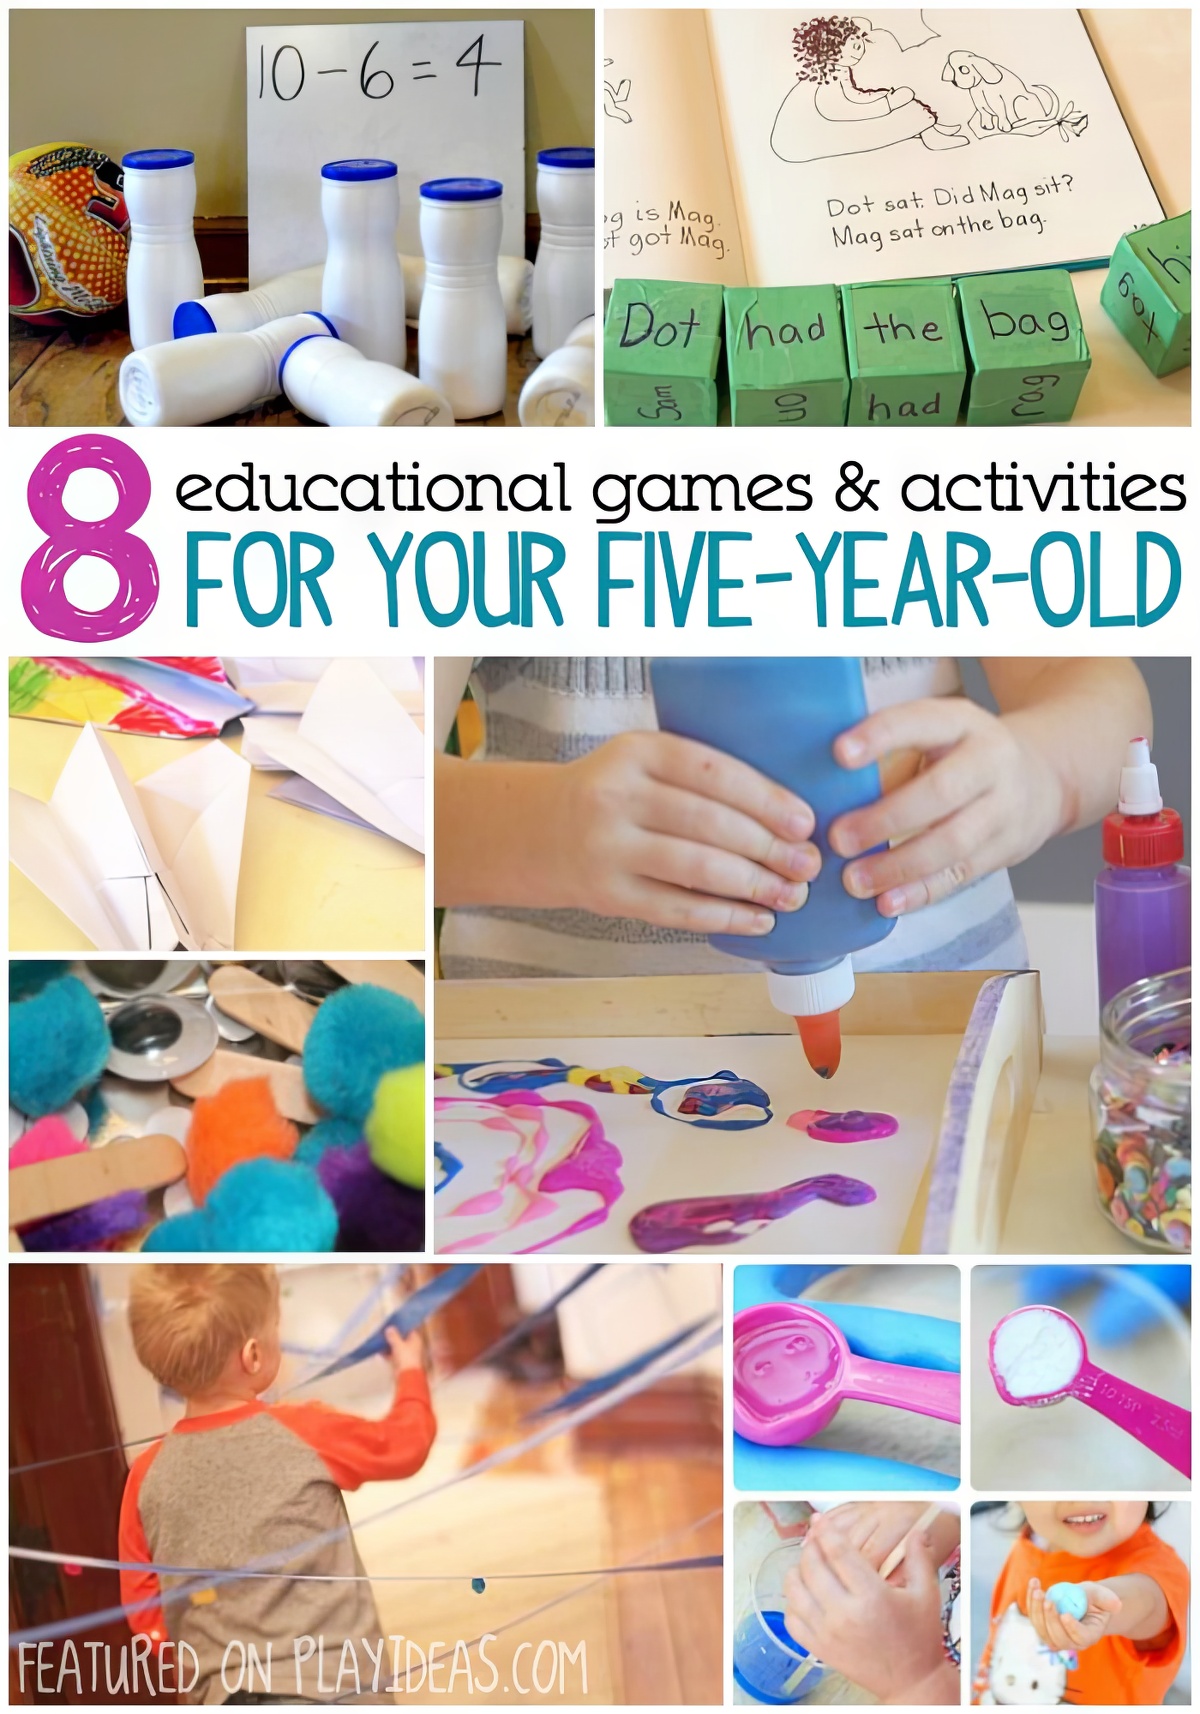 activities for 5 year olds nyc